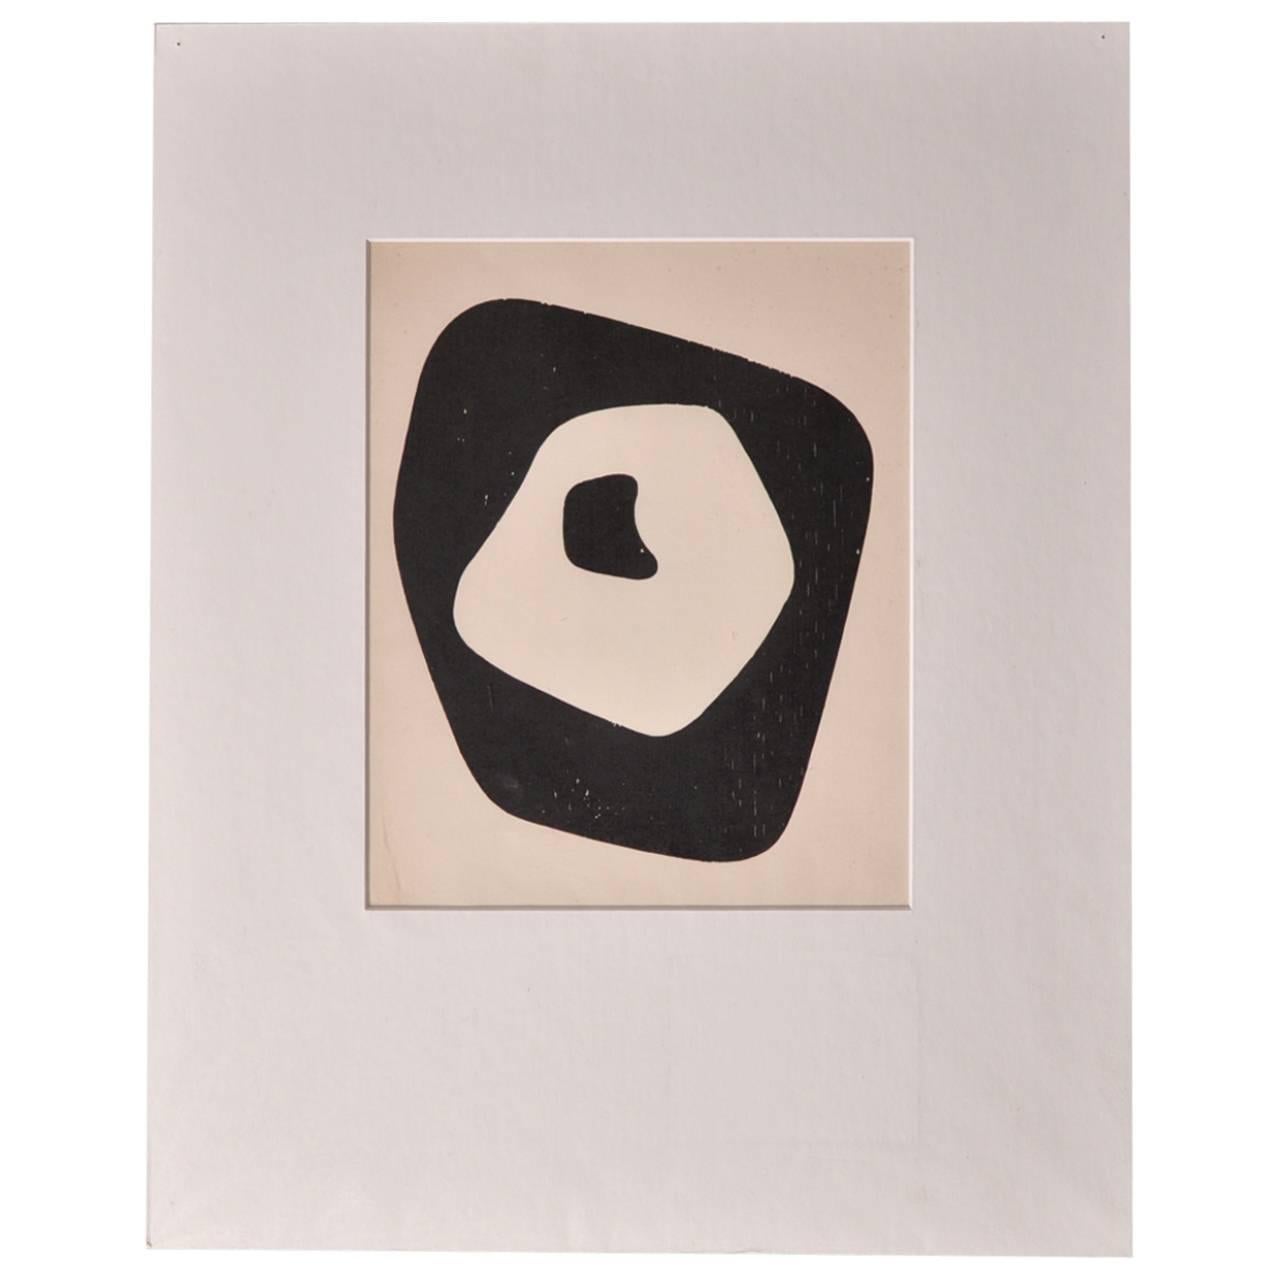 Jean Arp "Silent Tension" Woodcut, Paris, 1951, with Hand Signed Colophon